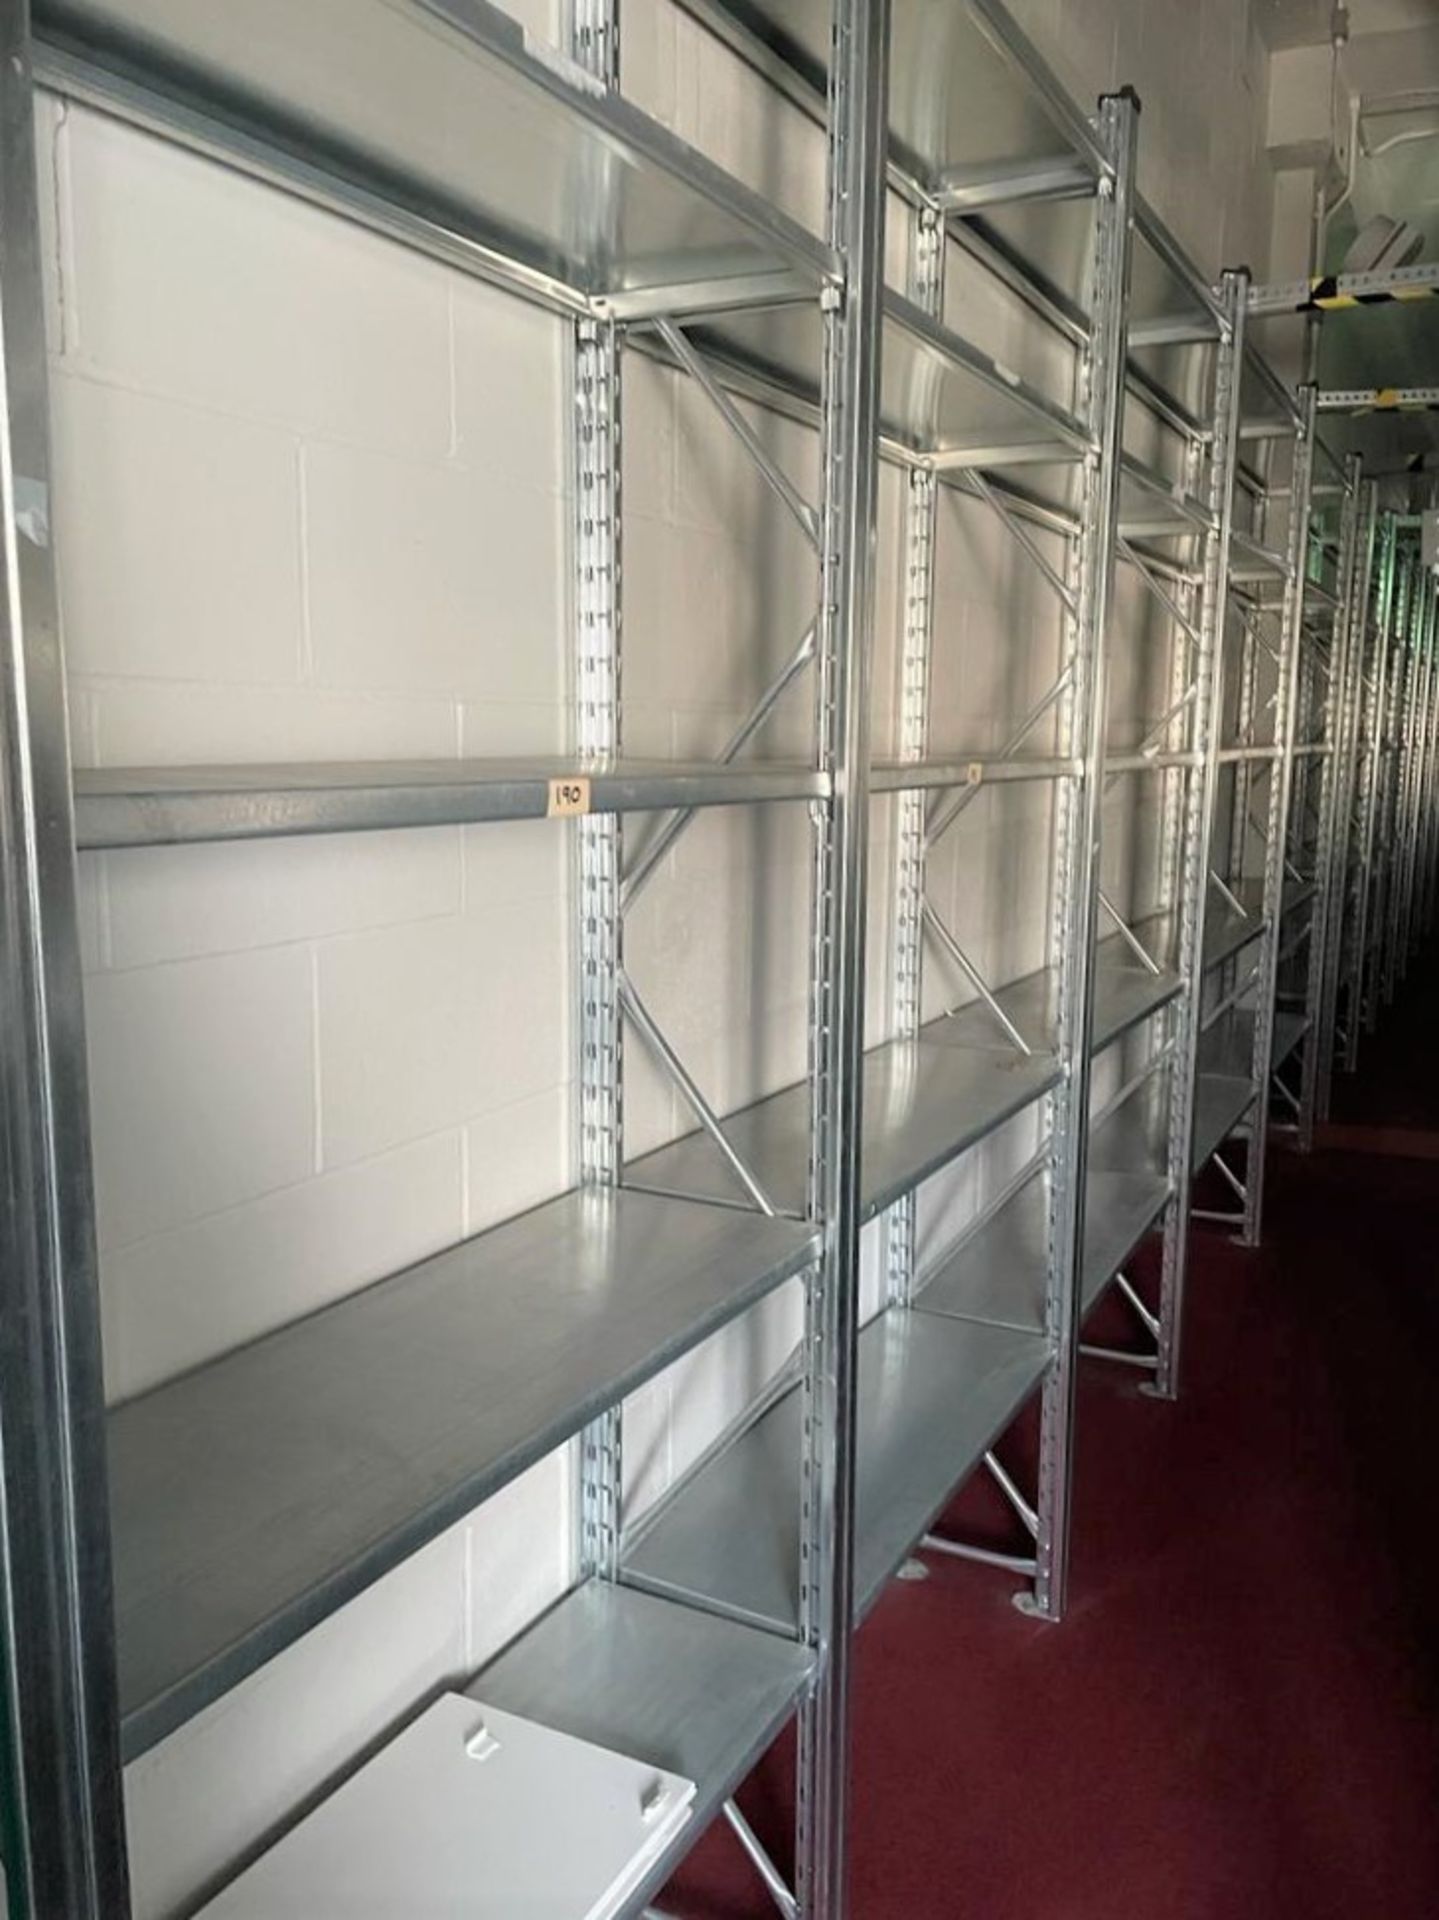 10 x Bays of High Quality Galvanised Steel Warehouse Shelving - Bay Dimensions: H250 x W100 x D30